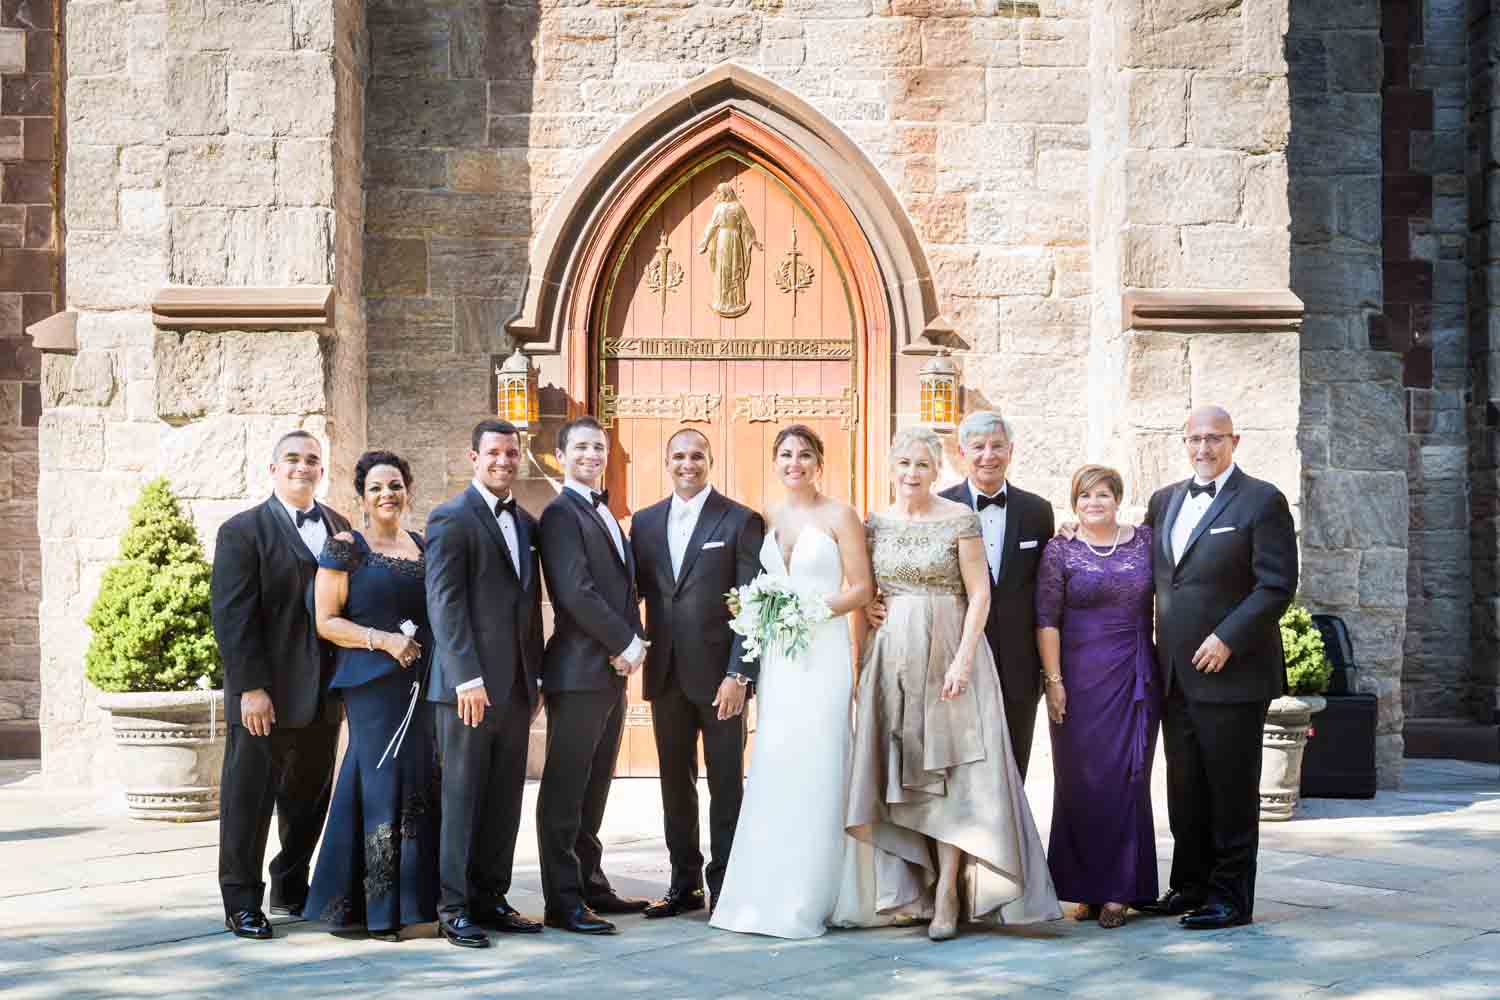 Family wedding portrait outside Fordham University Church for an article on Bronx Zoo wedding venue updates